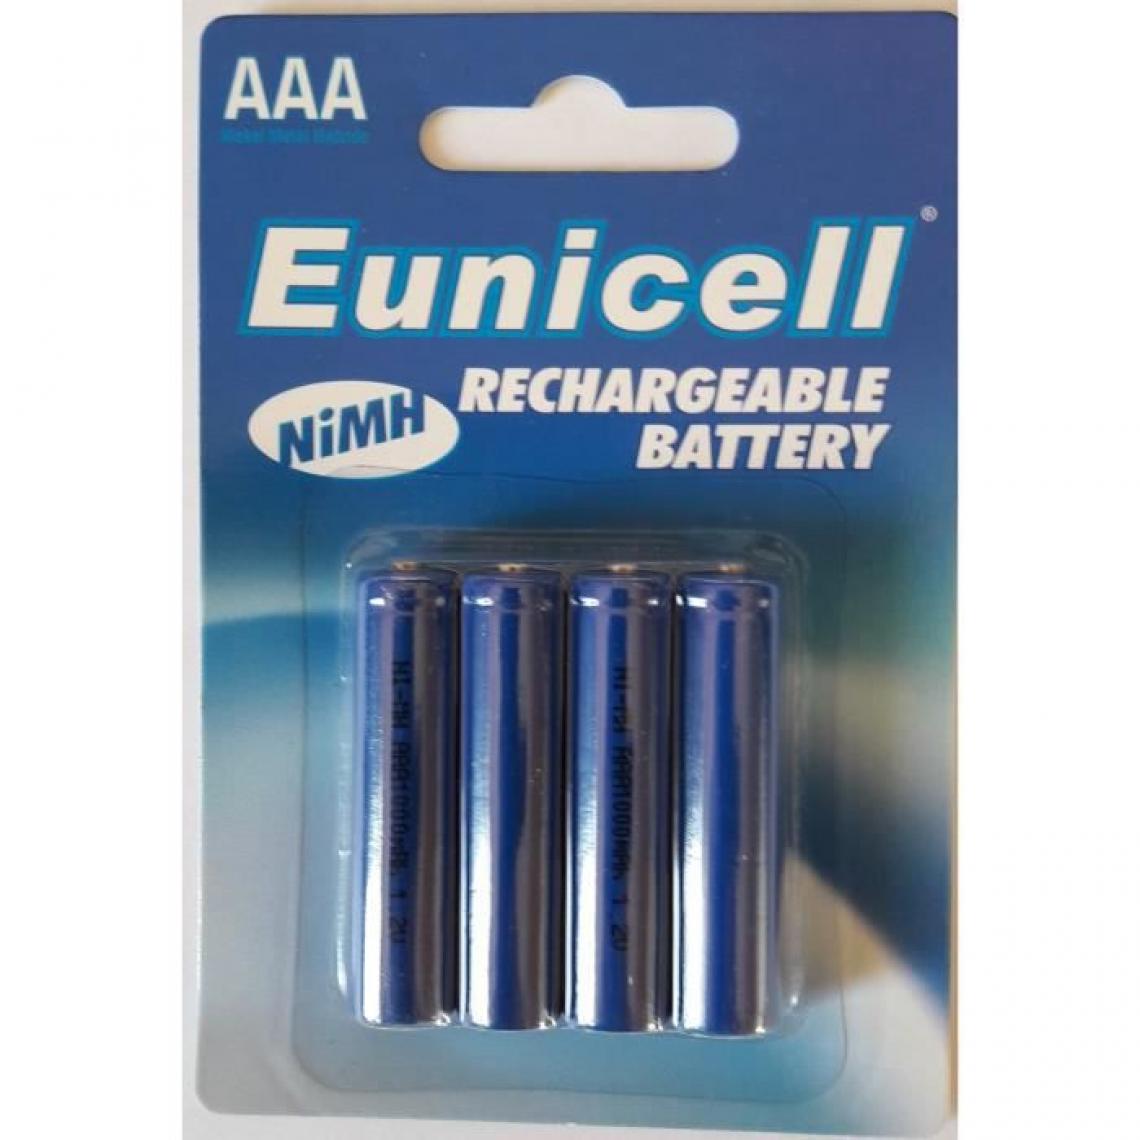 Eunicell - 4 piles rechargeables AAA-L - Piles rechargeables